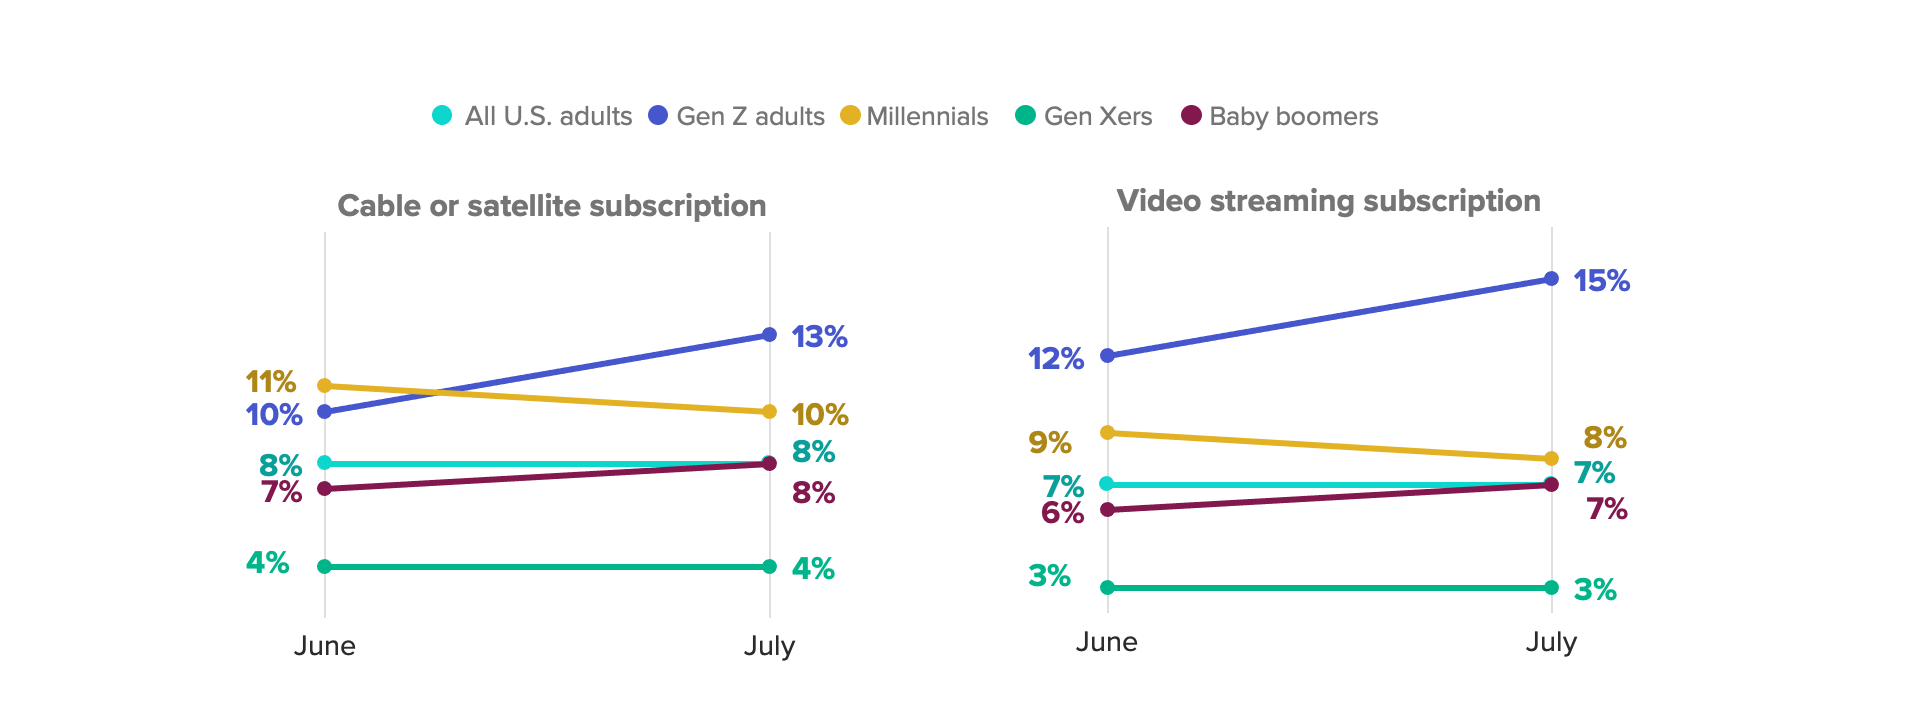 Trend lines chart of the share of consumers saying they cancelled a subscription showing younger generations are more likely to have made changes in subscriptions due to inflation.